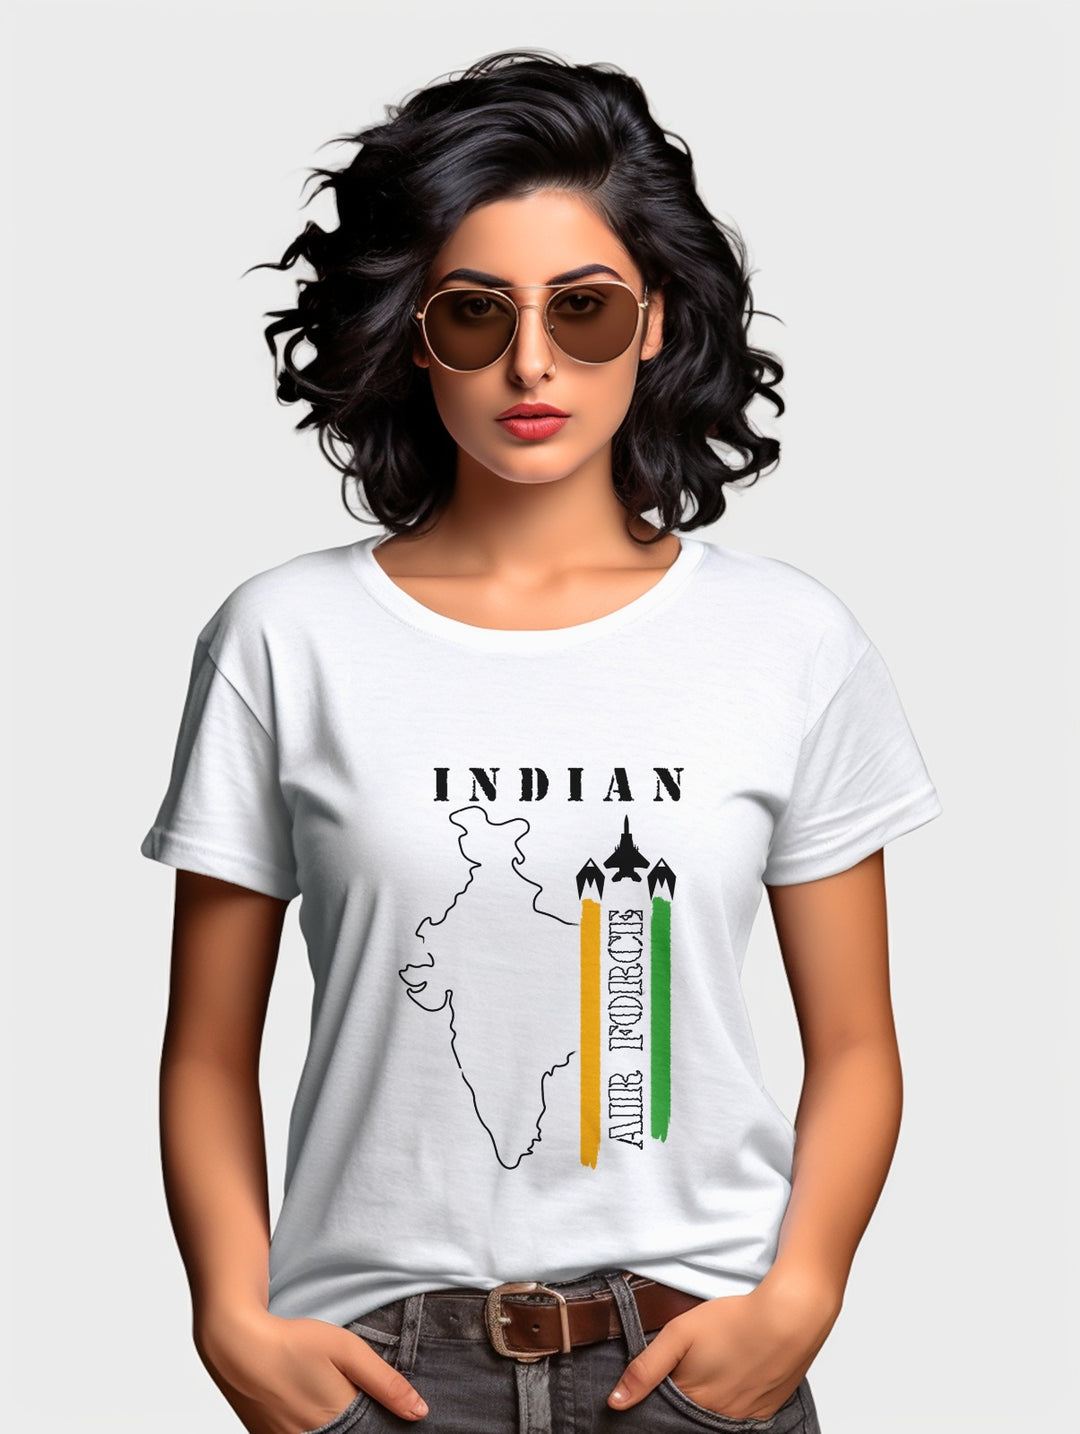 Women's Indian airforce tee